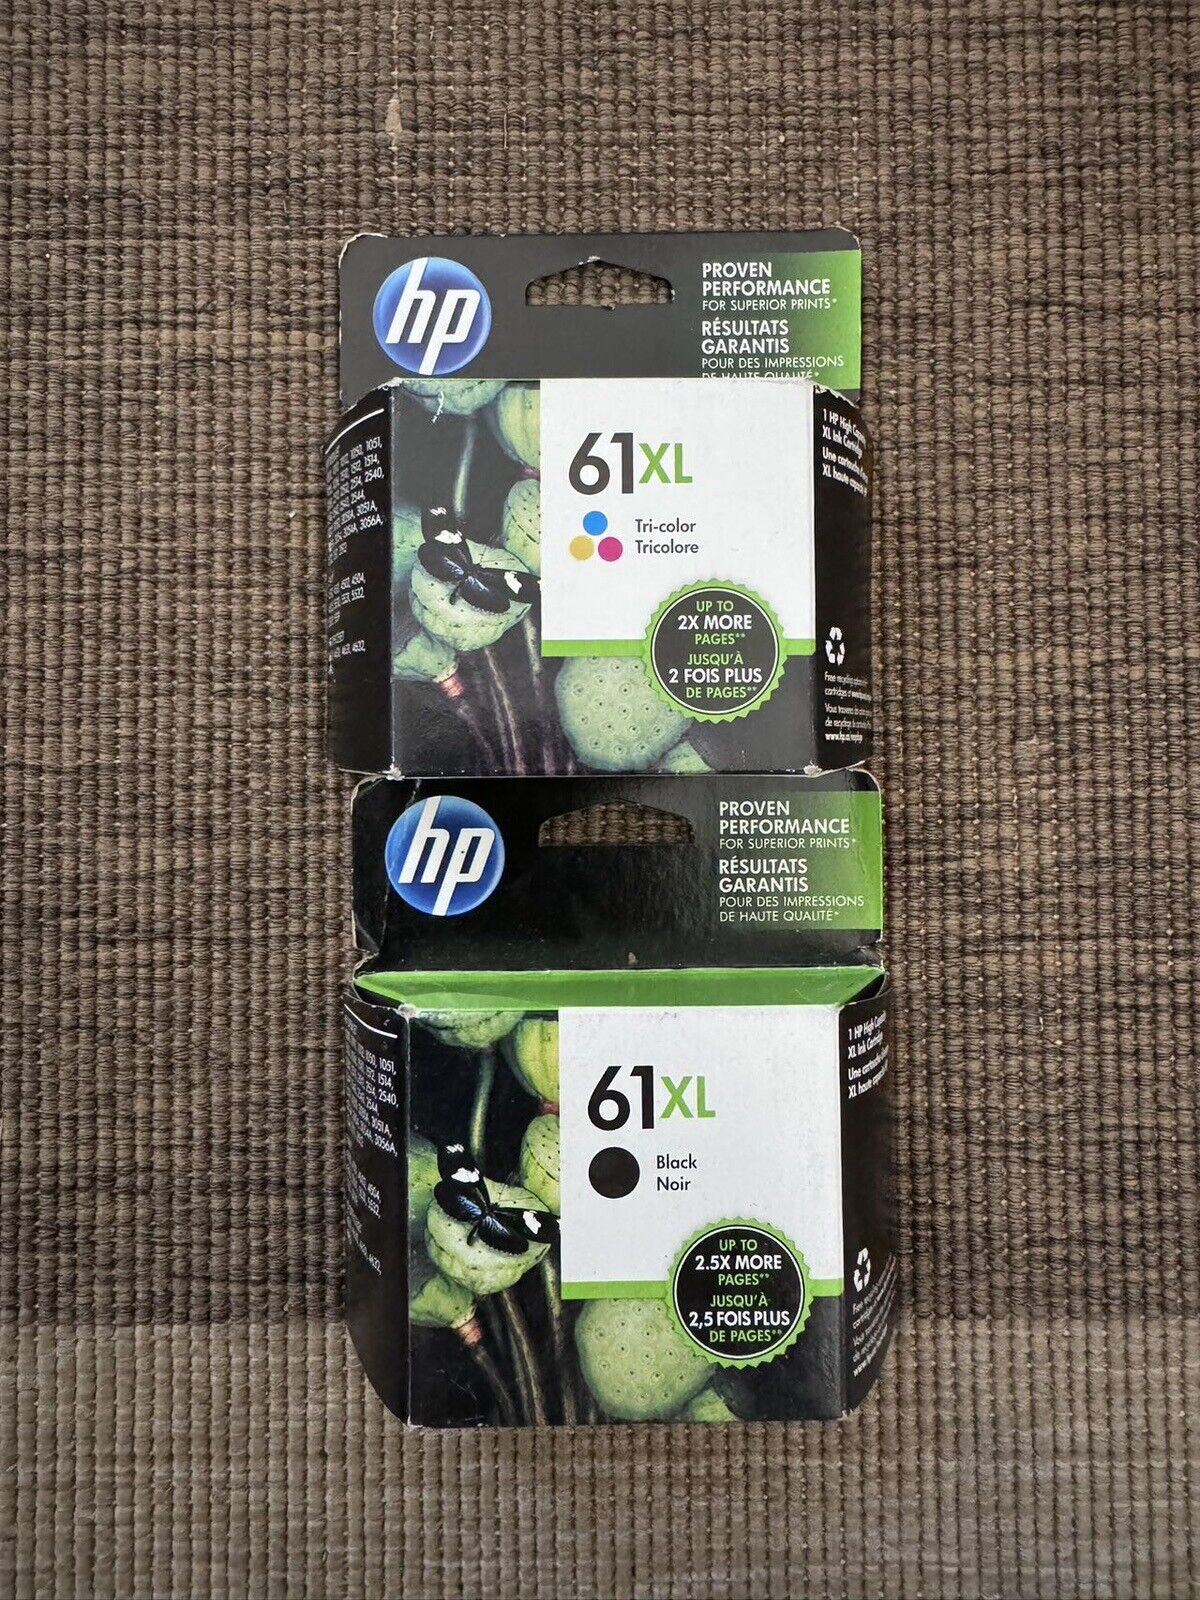 HP 61XL Black & Color Ink Cartridges Set in Retail Box  Combo Exp 2016/18